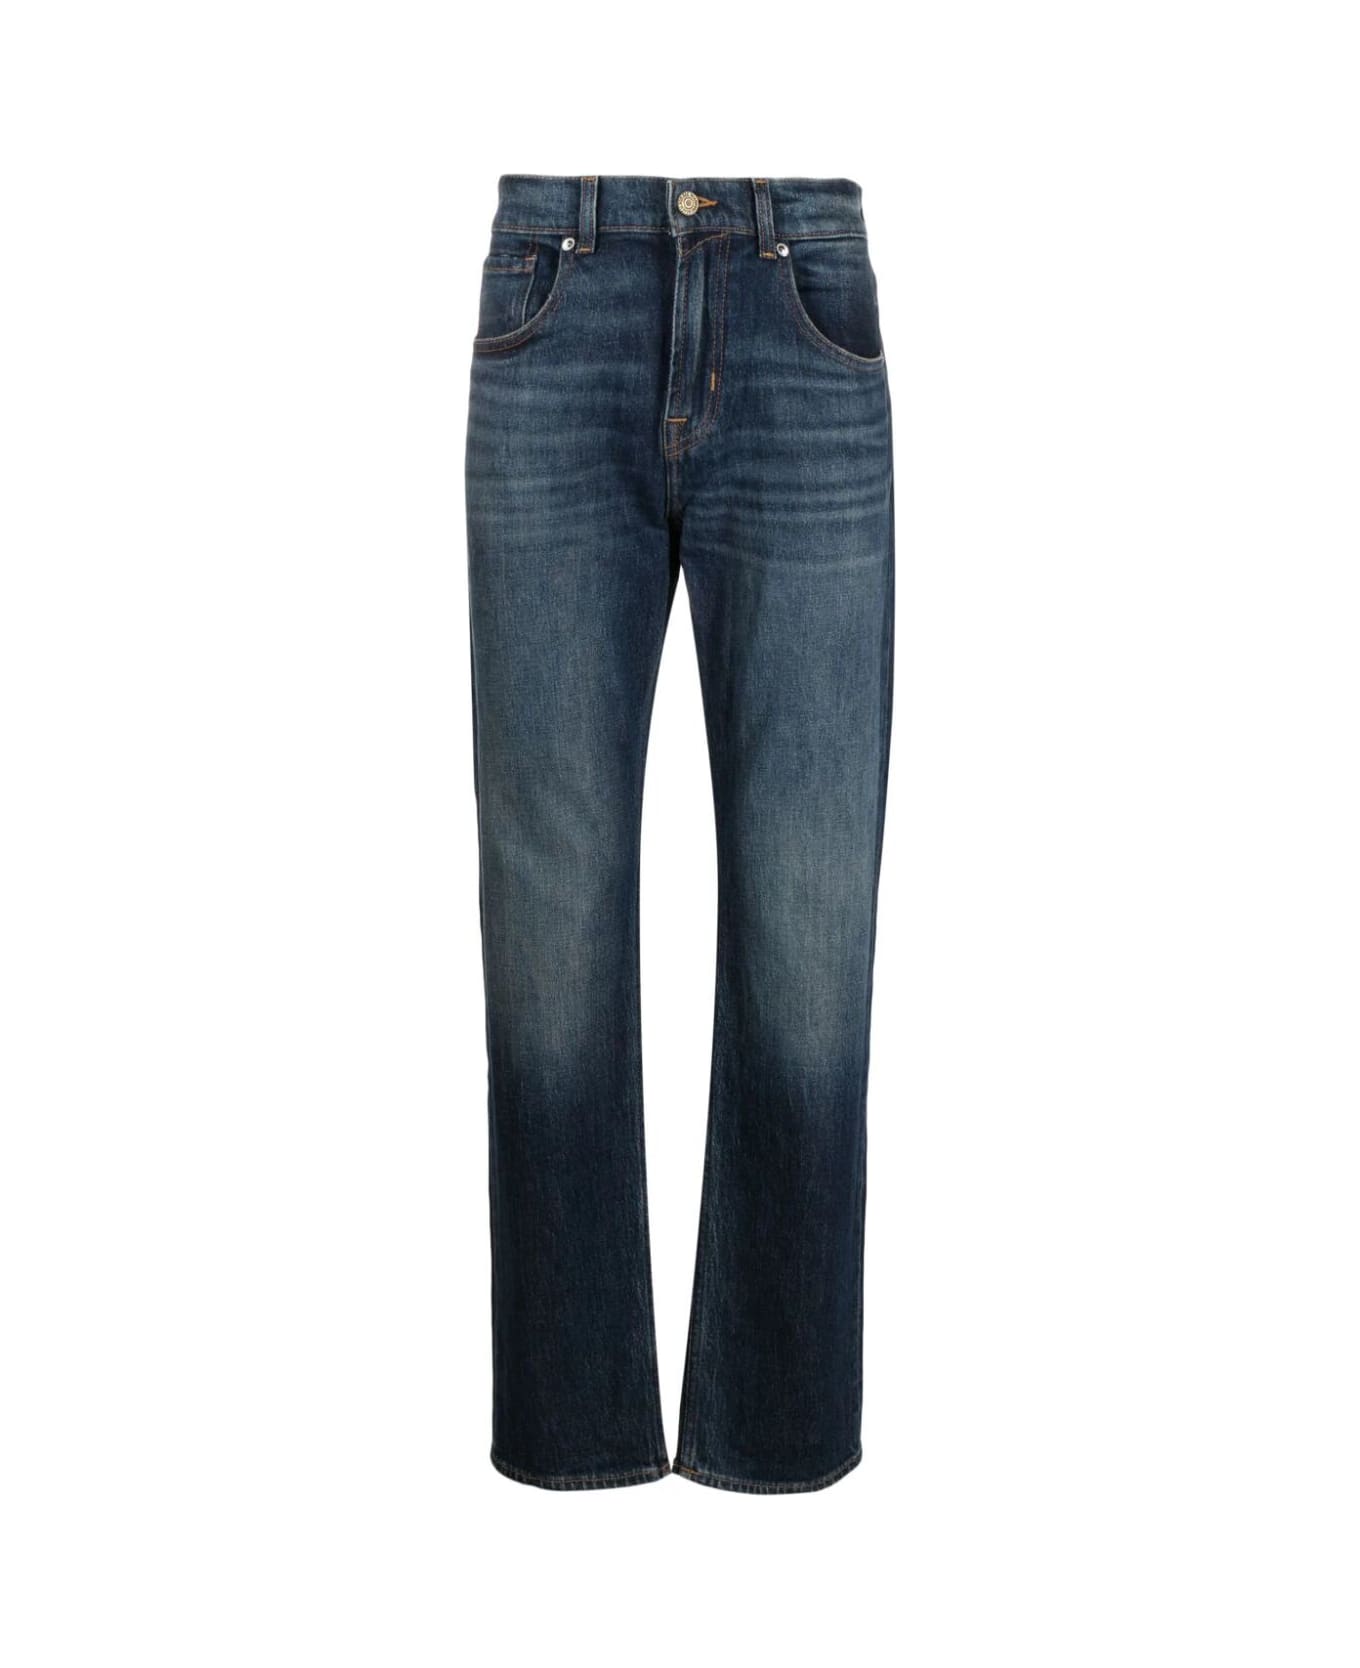 7 For All Mankind The Straight Upgrade Jeans - Dark Blue デニム